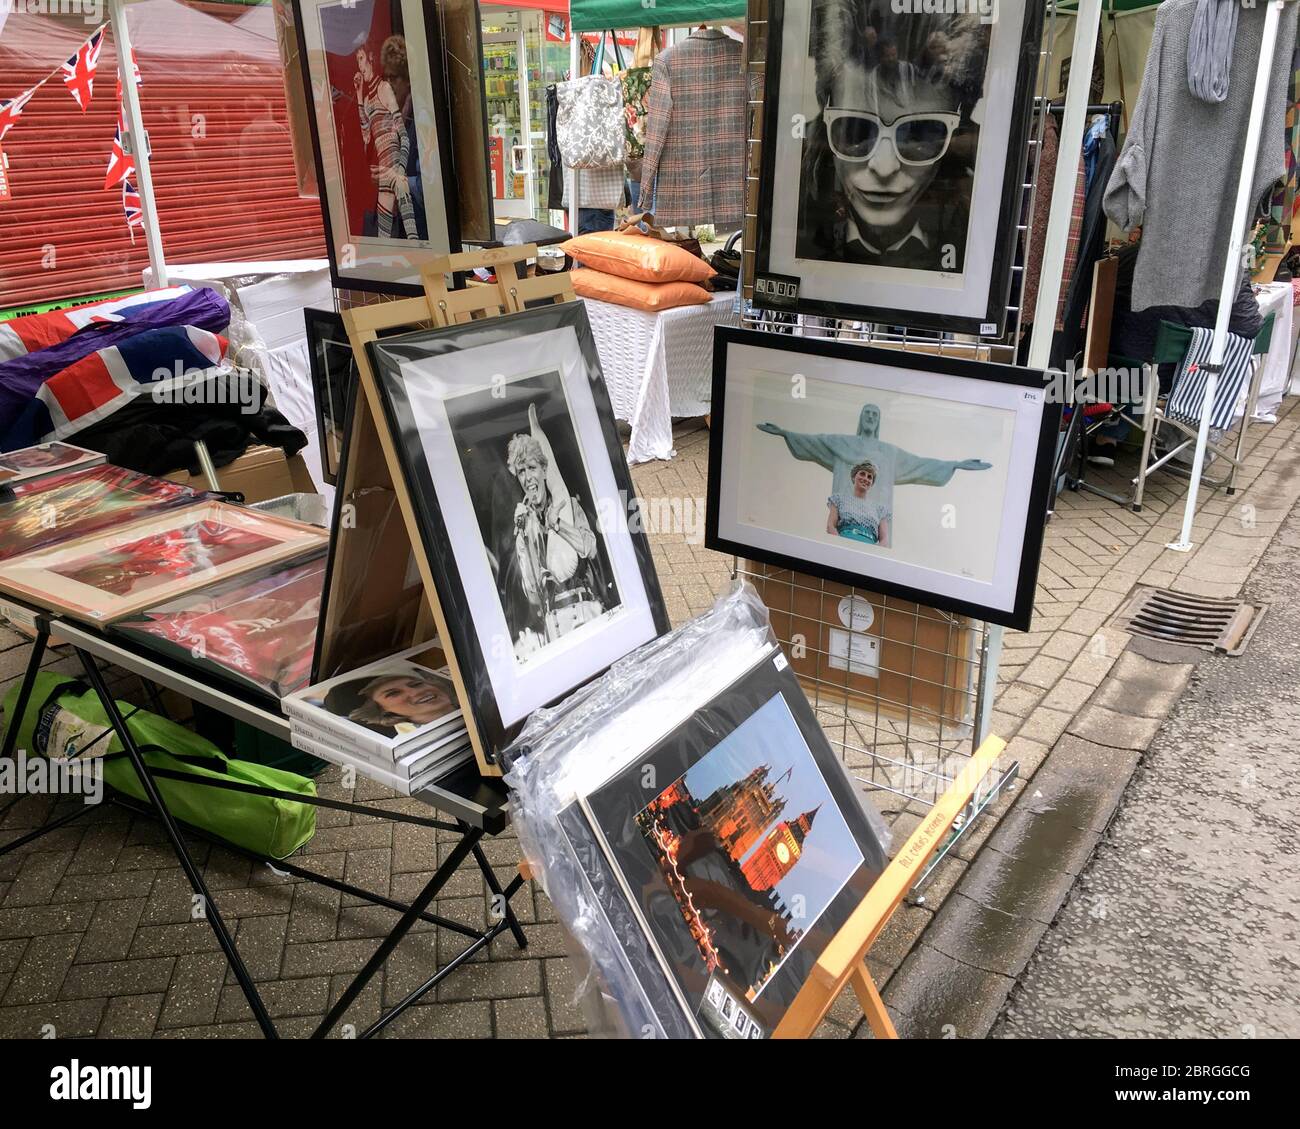 A fine art photography market stall selling framed archive photos of Royalty and celebrity including Princess Diana, David Bowie, HM Queen Elizabeth I Stock Photo